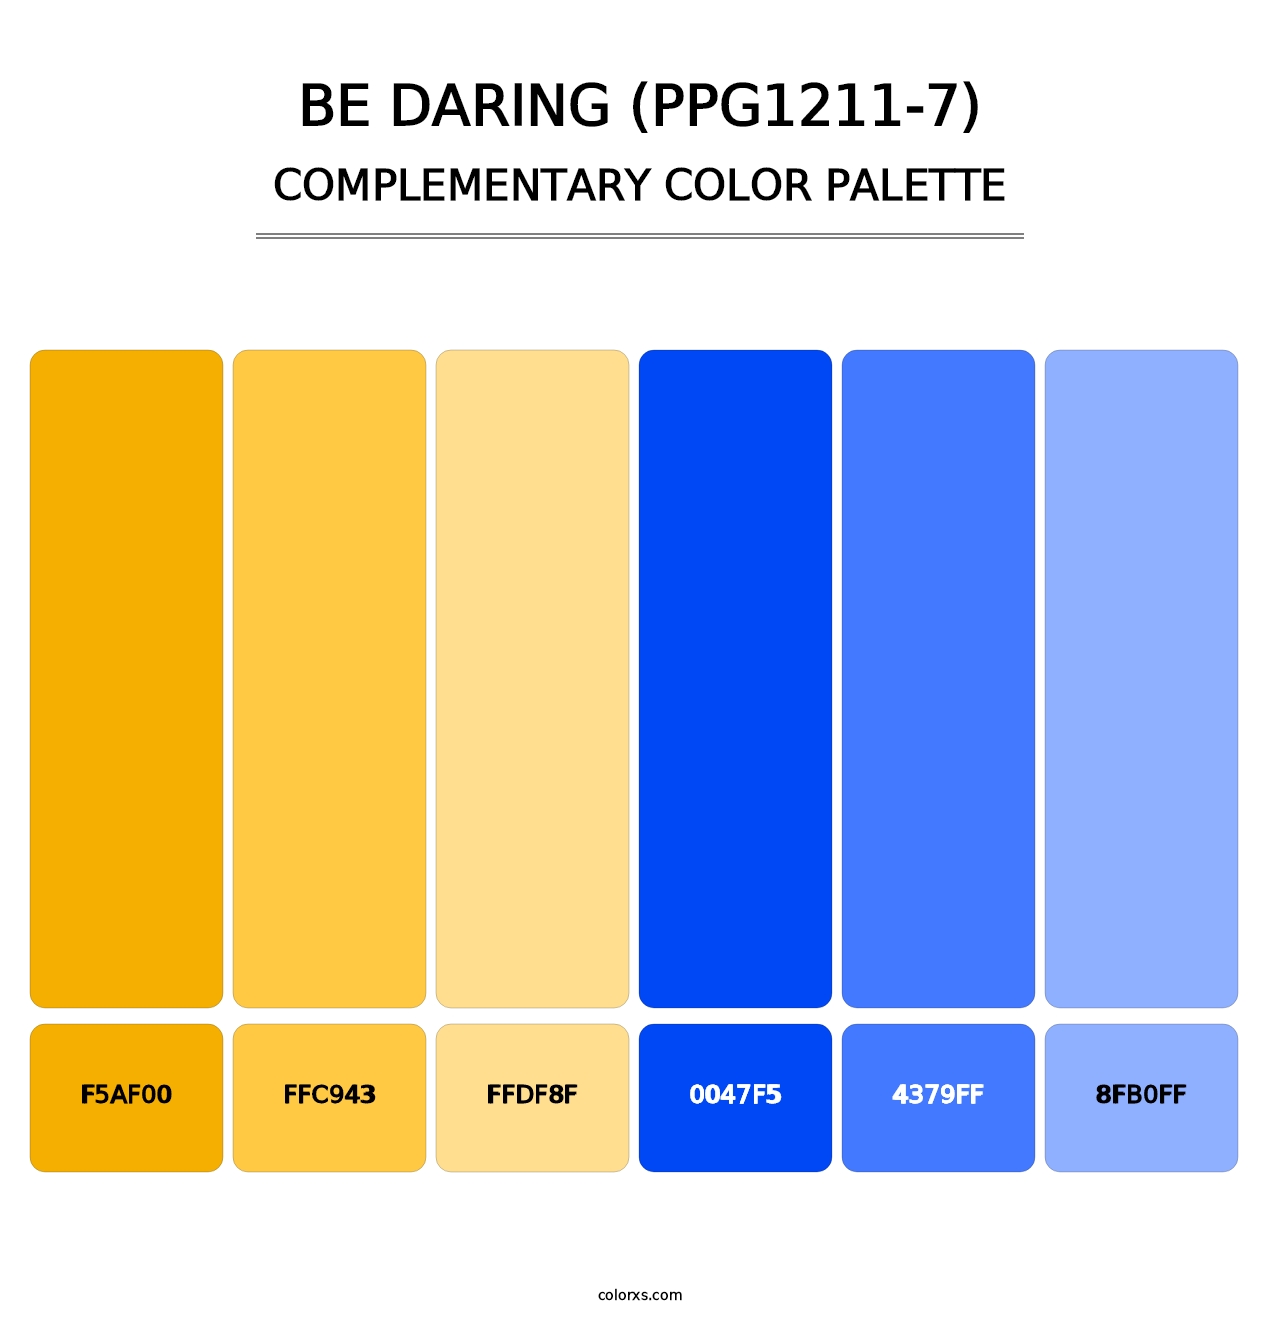 Be Daring (PPG1211-7) - Complementary Color Palette